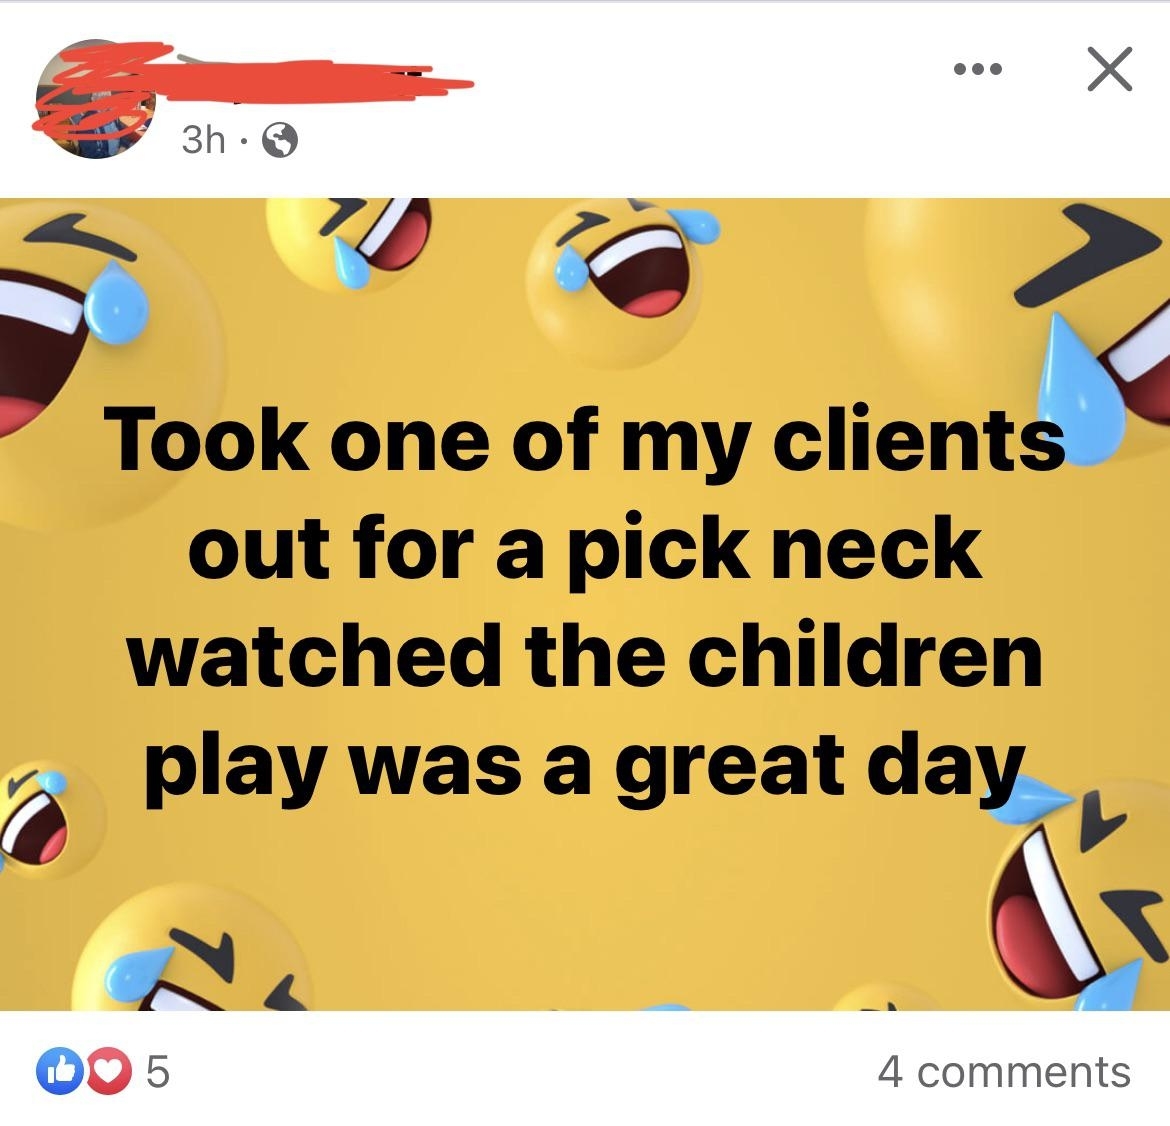 &quot;Took one of my clients out for a pick neck watched the children play was a great day&quot;